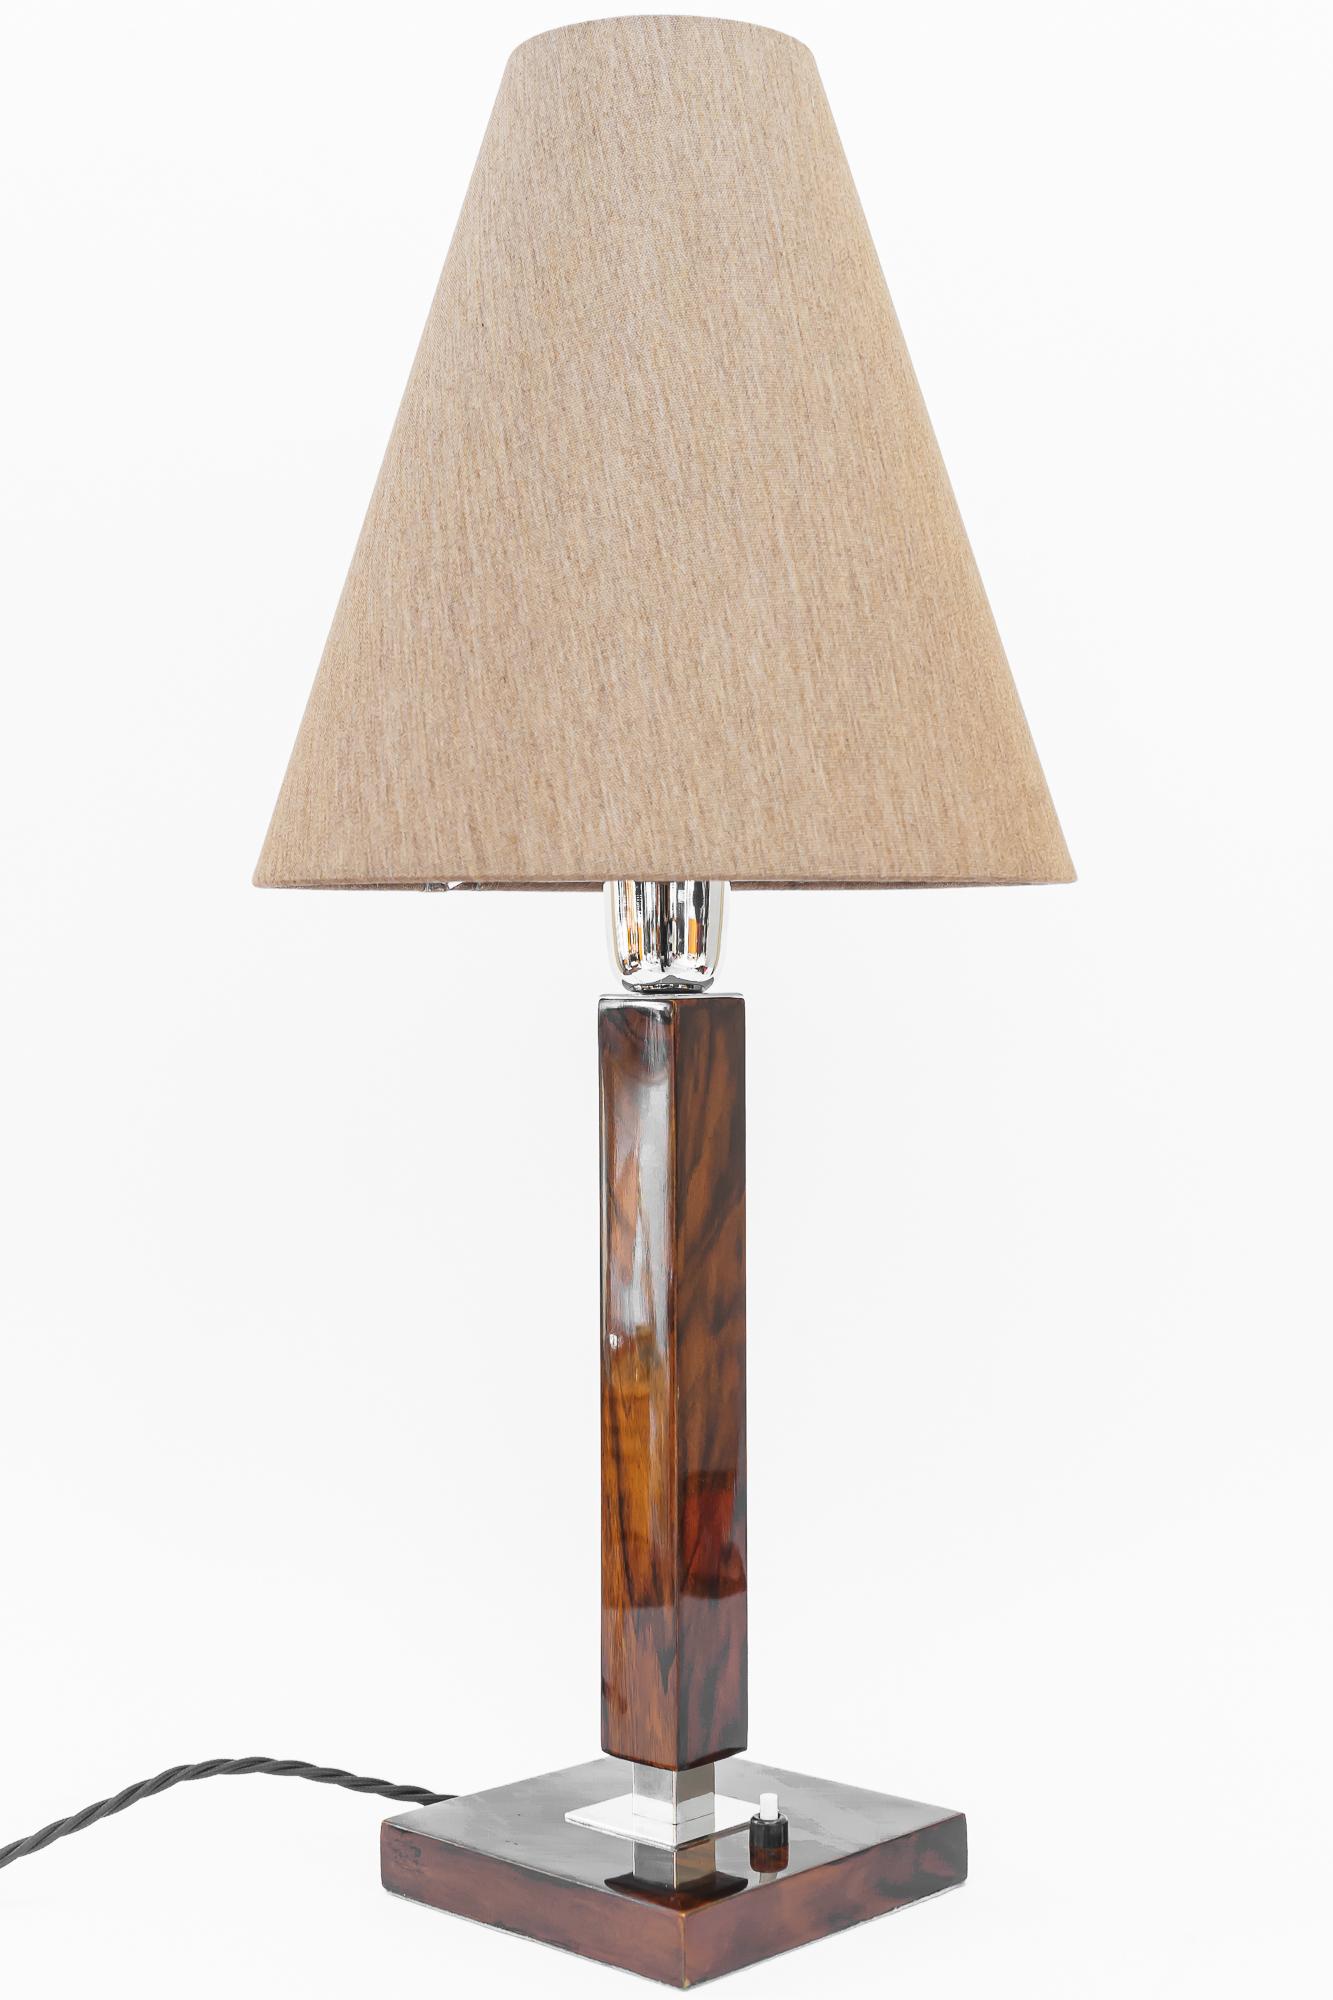 Polished Art Deco Table Lamp Vienna Around 1920 Nut Wood and Fabric Shade For Sale